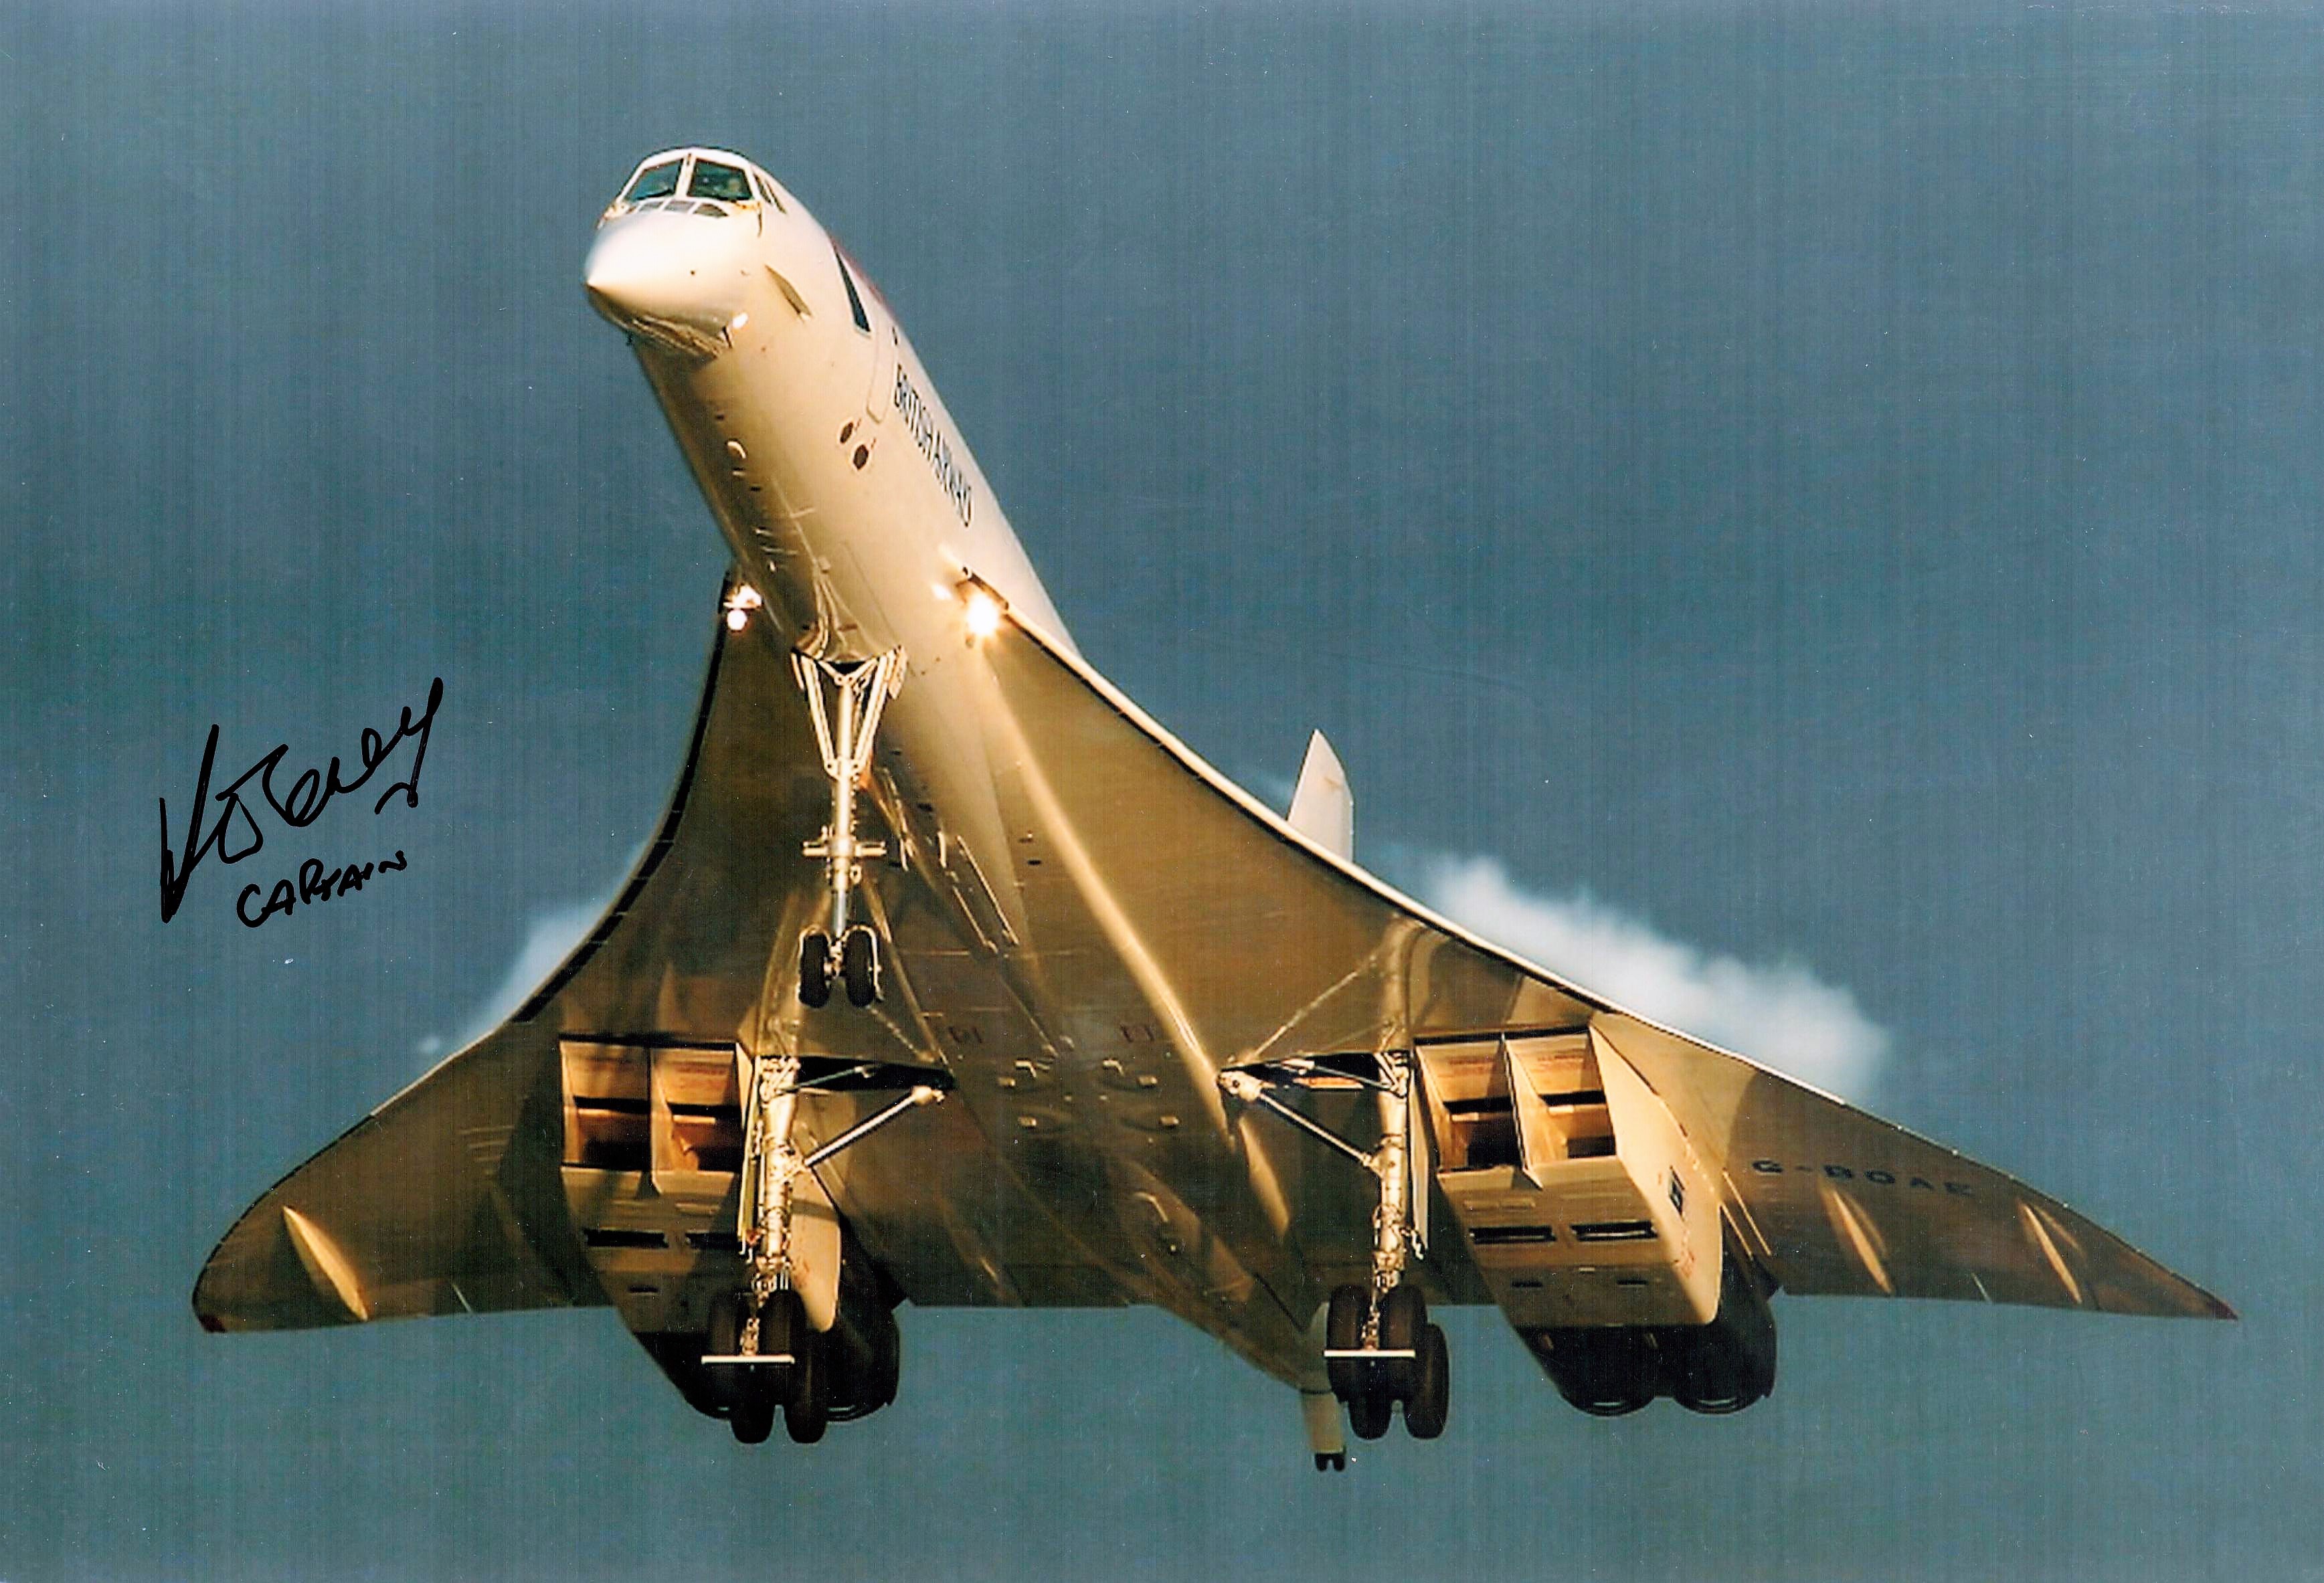 Concorde Captain David Leney signed 12 x 8 inch colour photo, stunning image showing underneath of